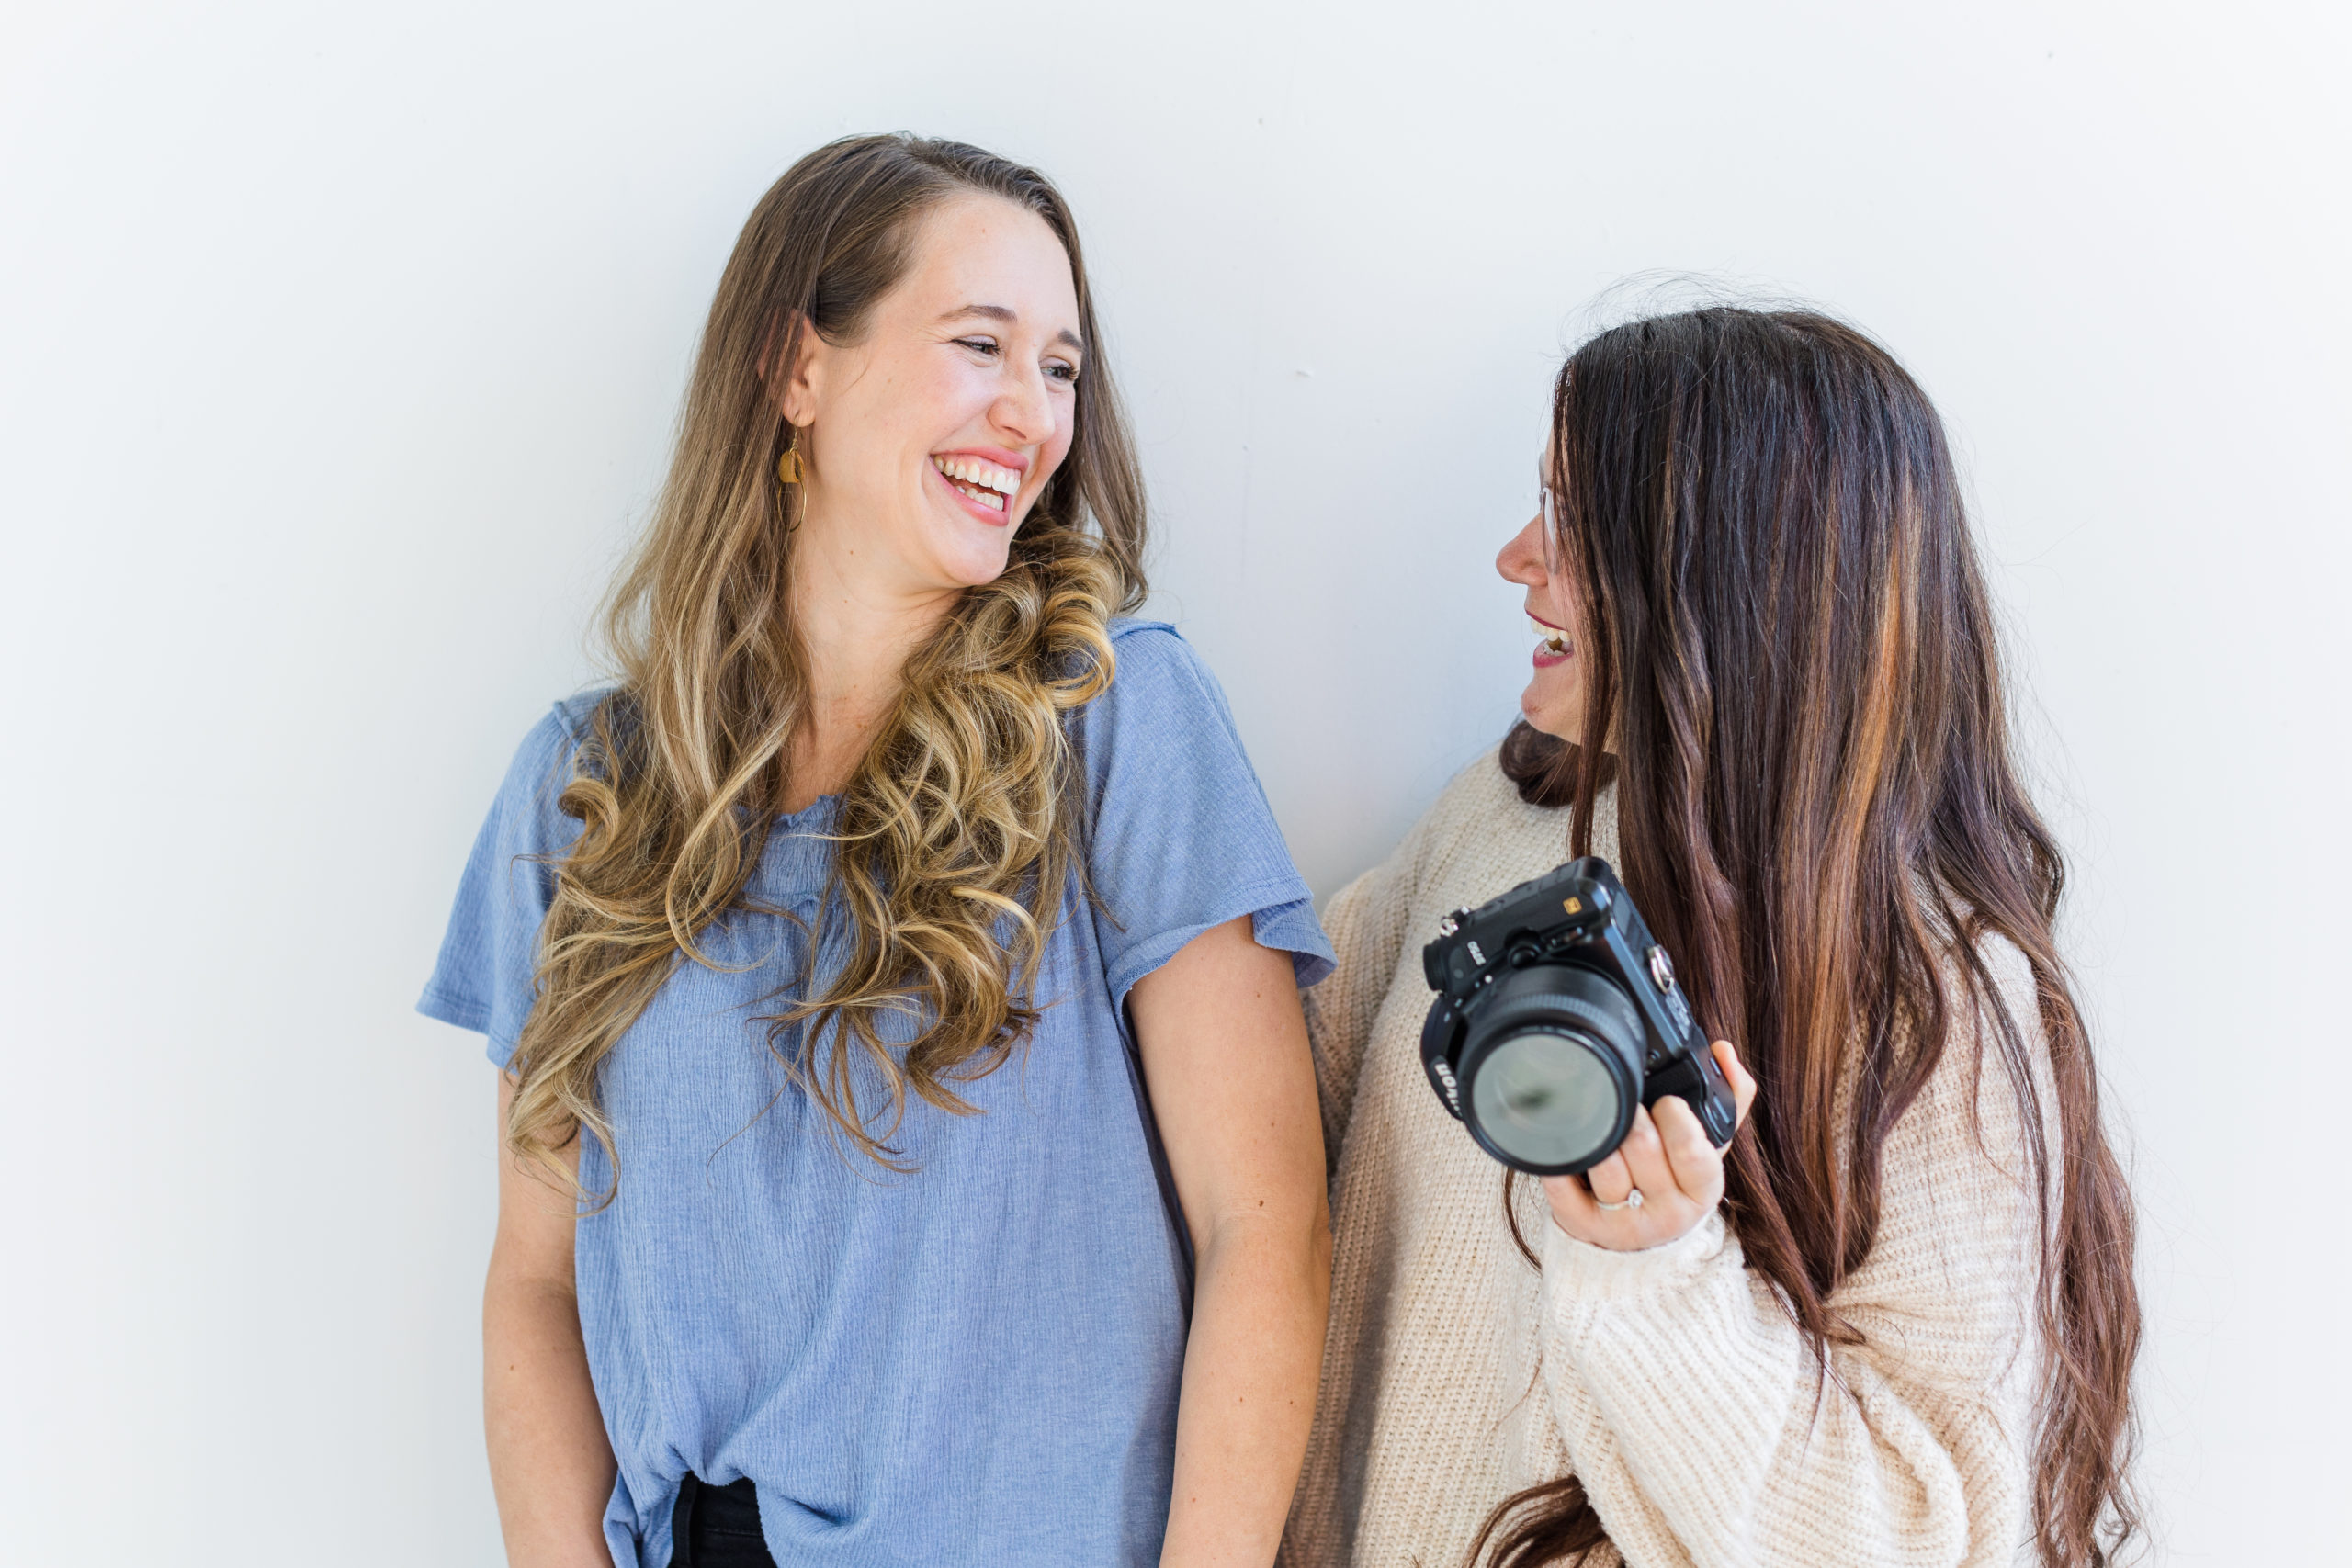 Stephanie is wearing a blue shirt and black pants. Christi is beside her wearing a white oversized sweater and black pants. They are both holding their cameras and laughing at each other. Top 5 Questions to Ask Your Photographer